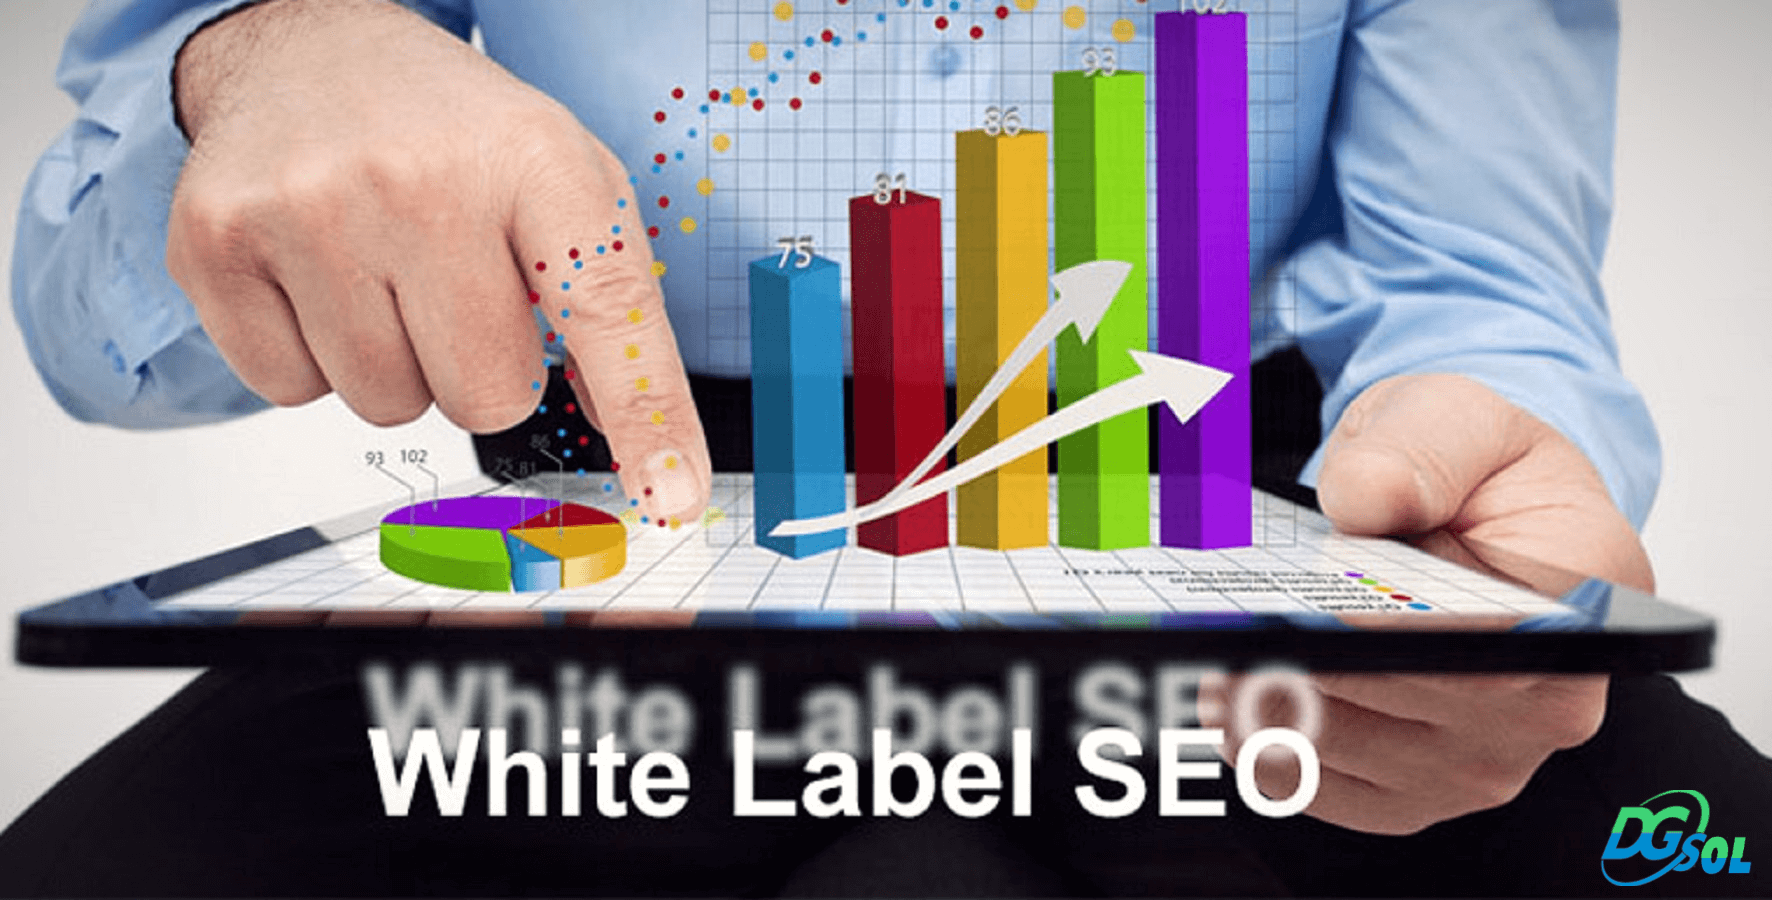 What Is White Label SEO and How to Find Professional White Label SEO Services Provider